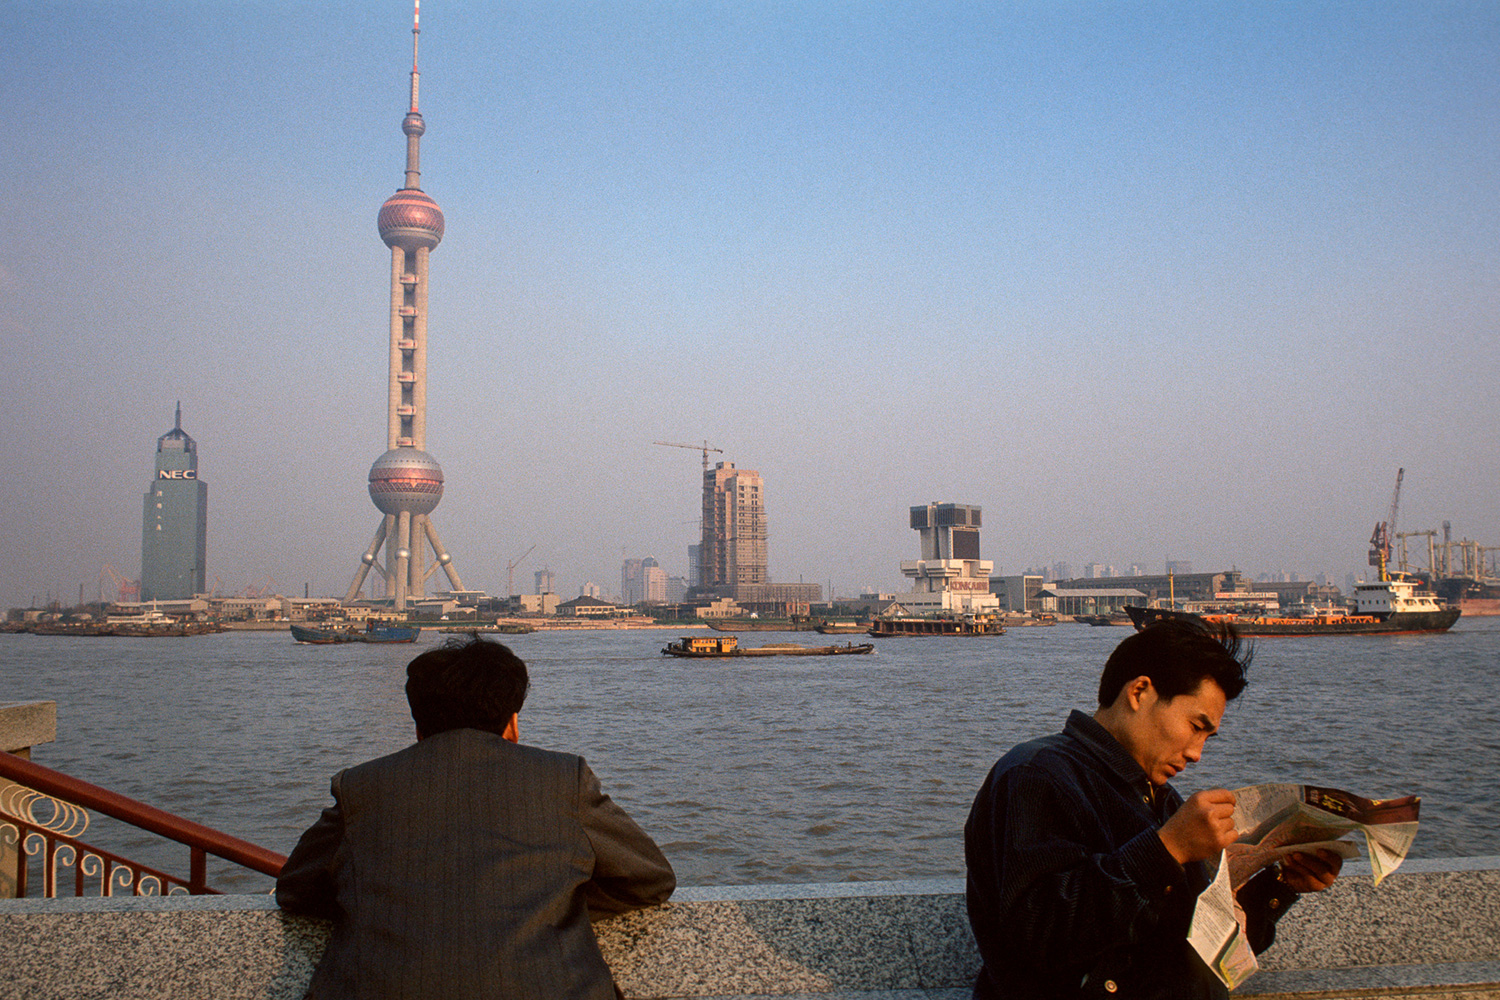 View of the Pudong New Area in 1994 seen from Puxi Bund, across the Huangpu River.